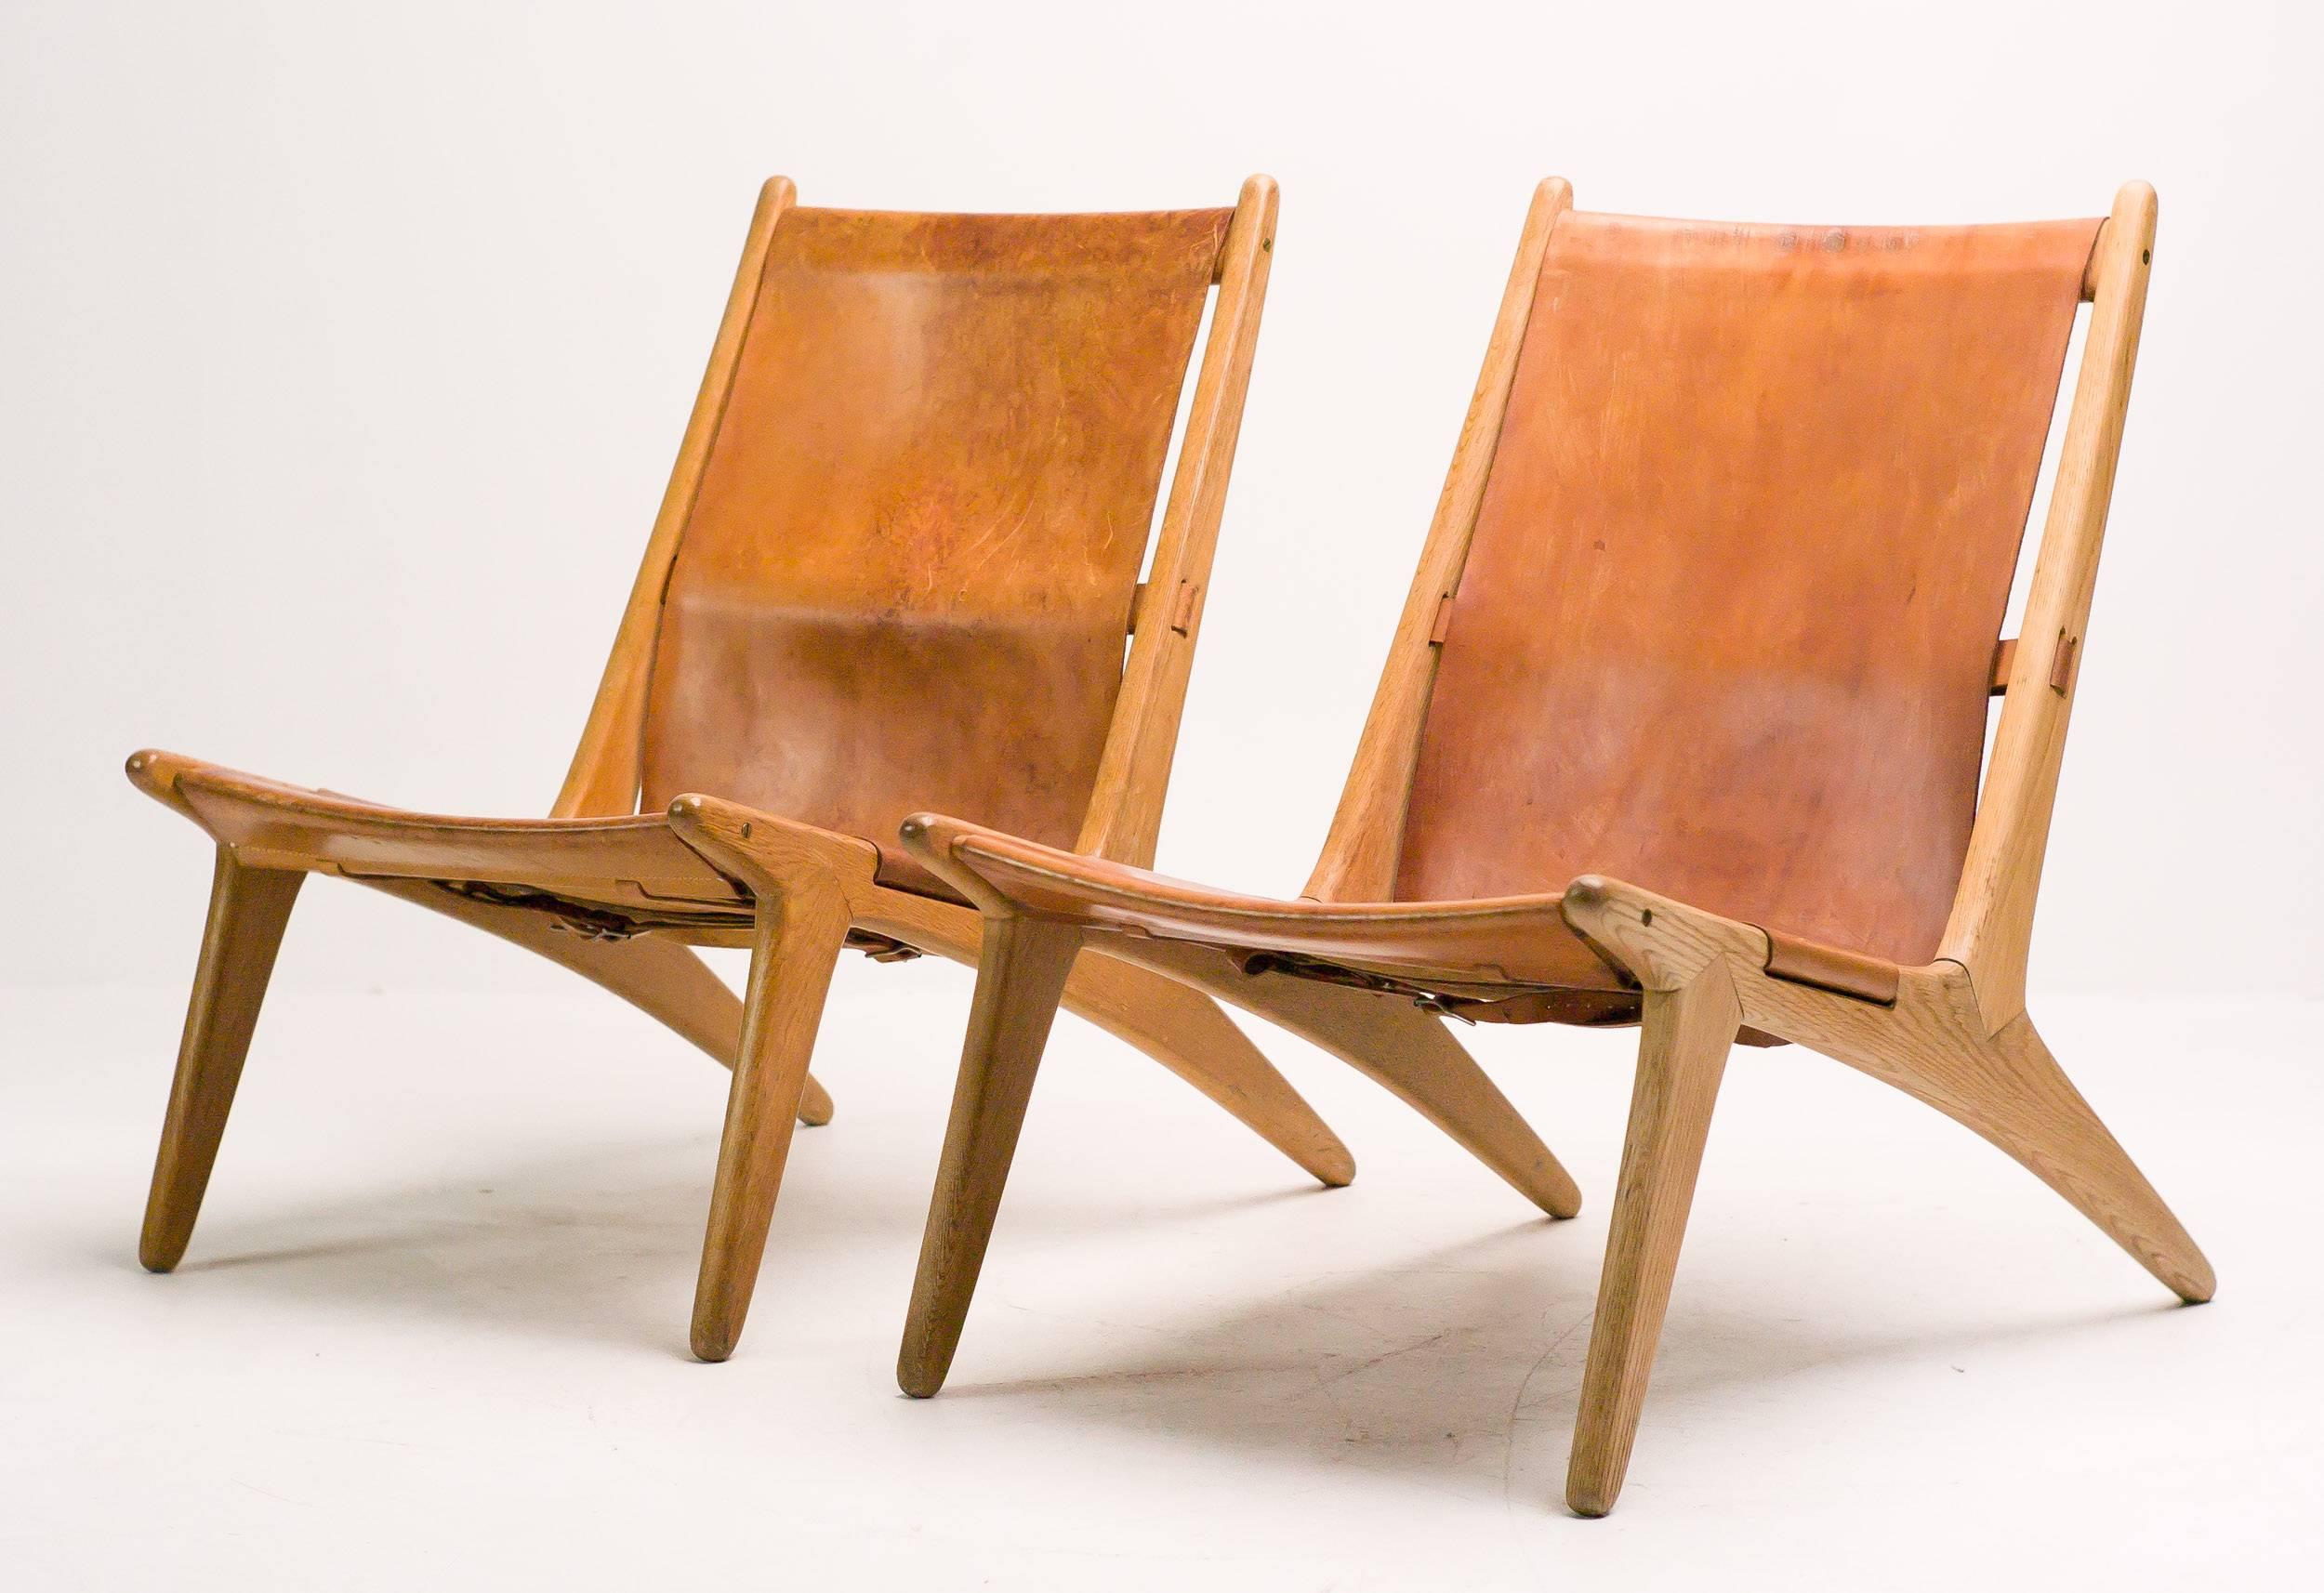 Scandinavian Modern Pair of Hunting Chairs Model 204 by Uno and Osten Kristiansson